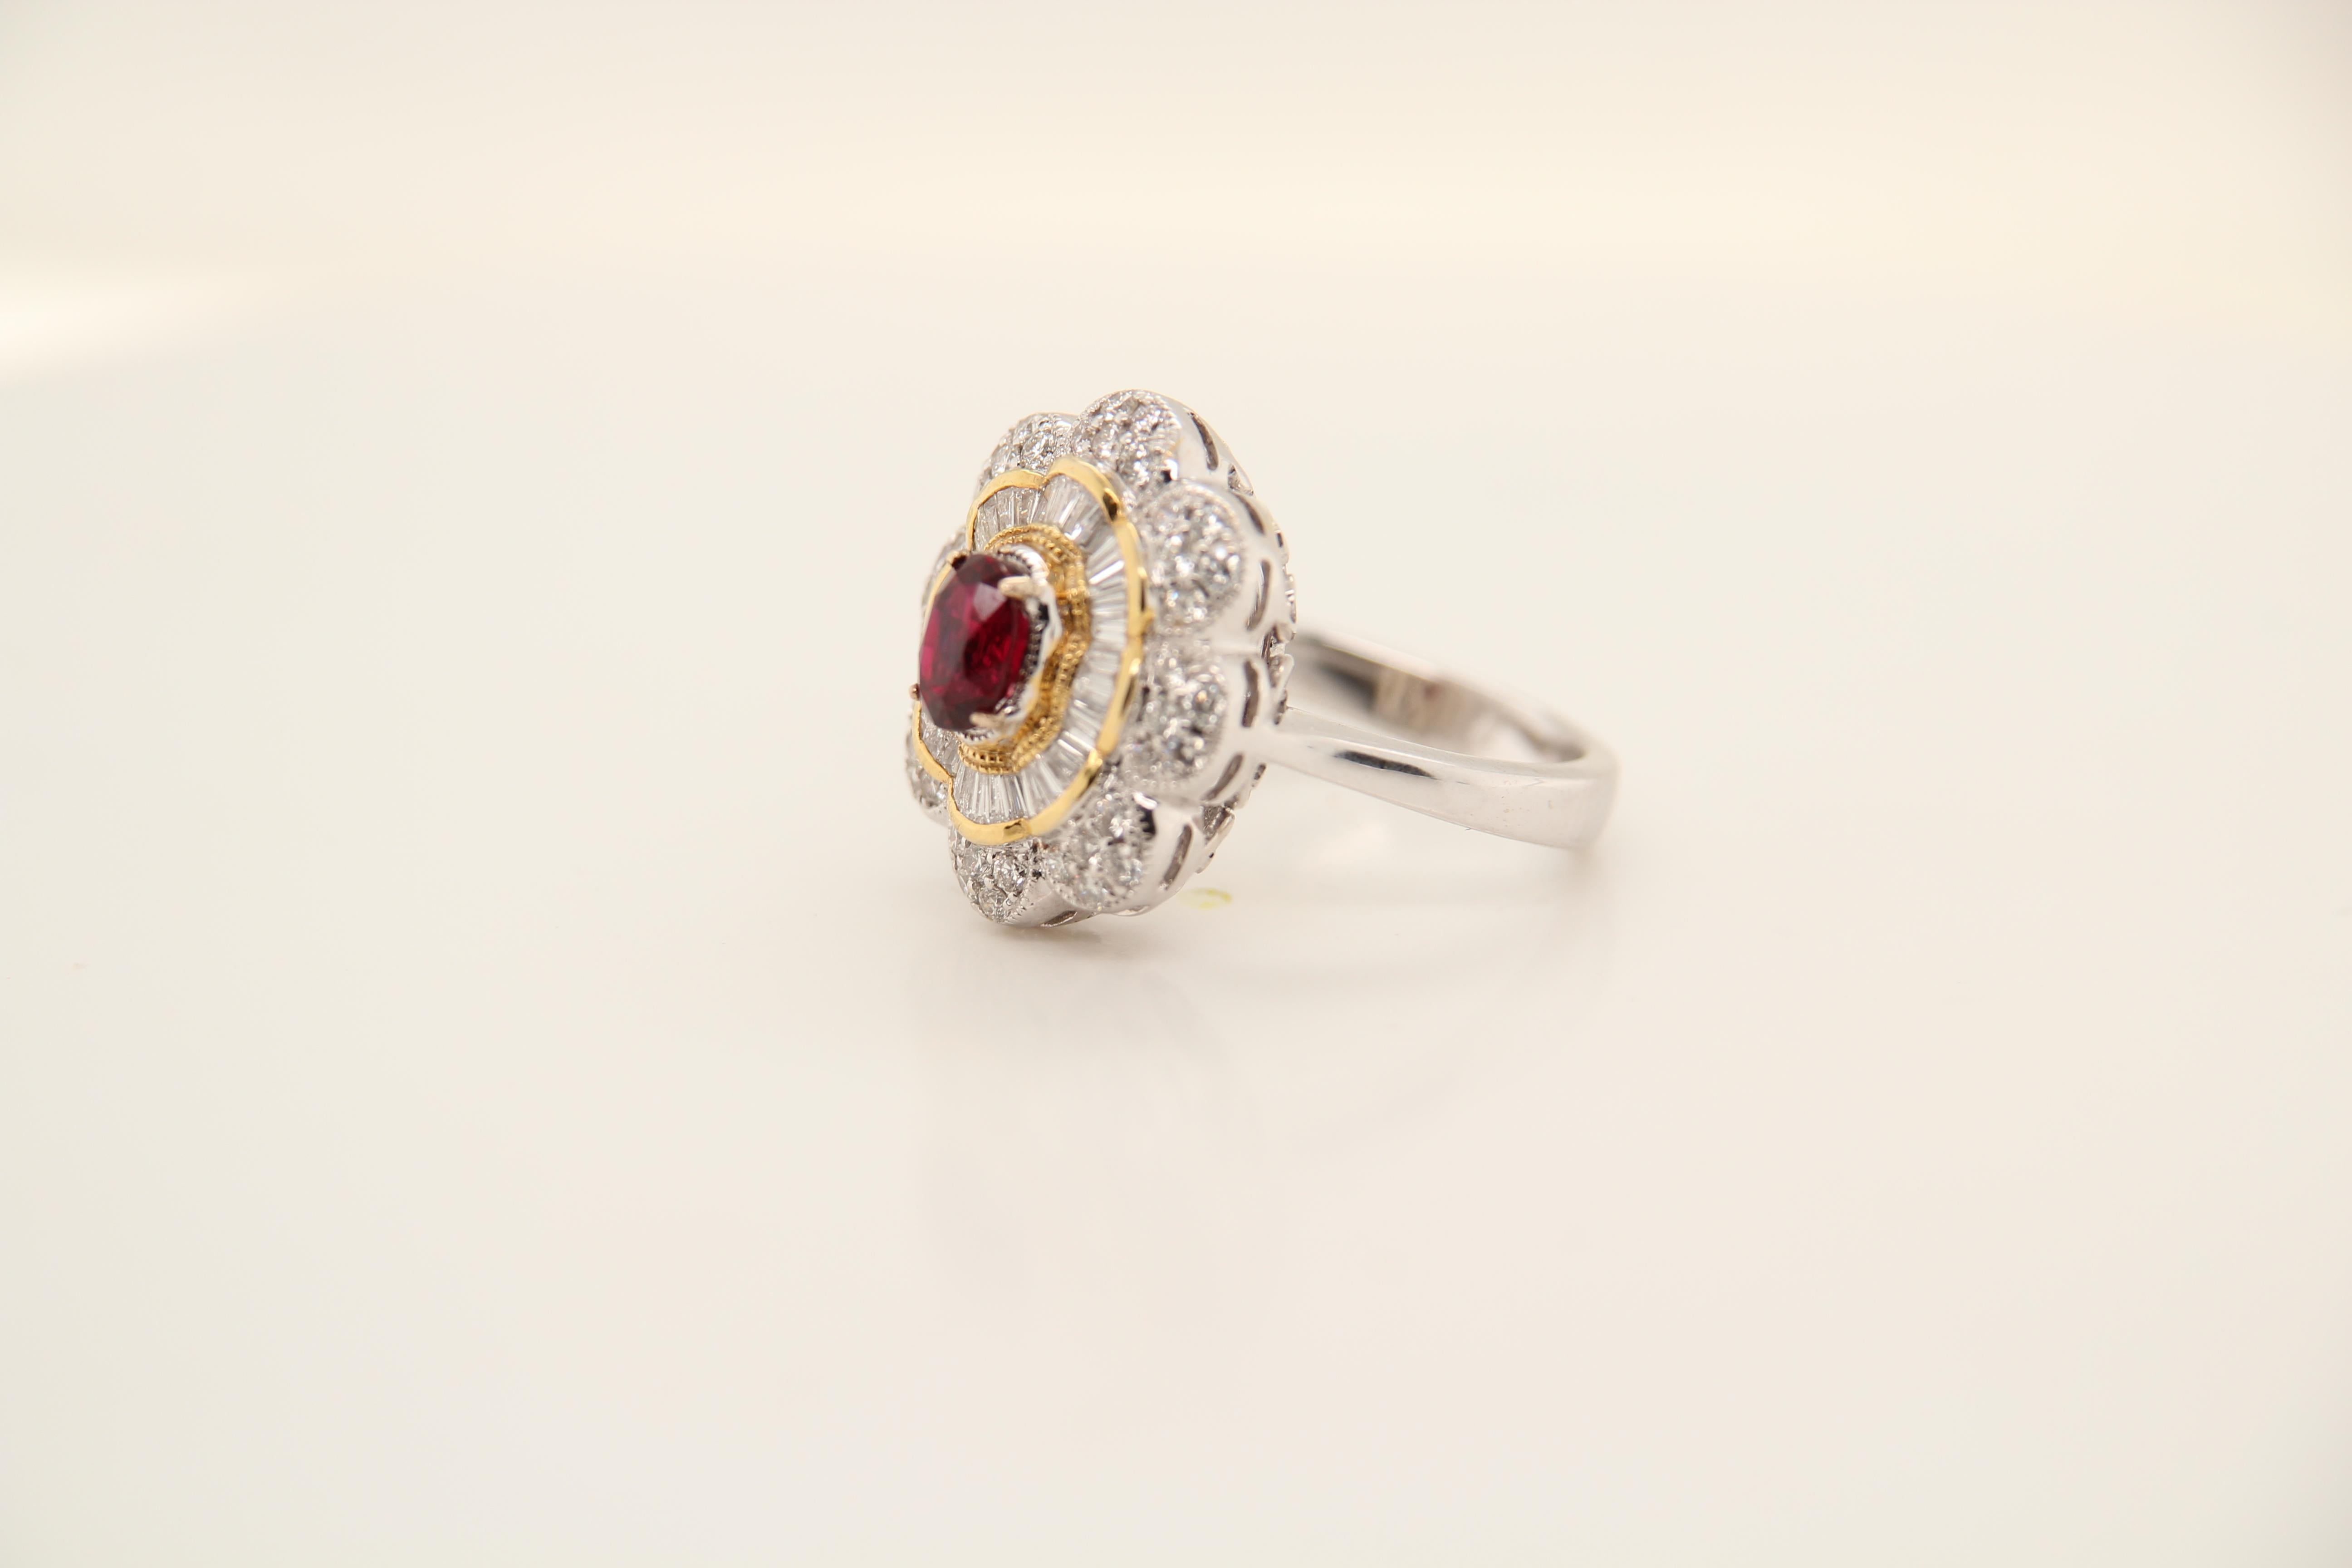 A brand new handcrafted ruby ring. The ring's center stone is 1.02 carat Burmese ruby certified by Gem Research Swisslab (GRS) as natural, unheated, 'Pigeon blood' with the certificate number: 2020-031160 The piece has been set with four claw